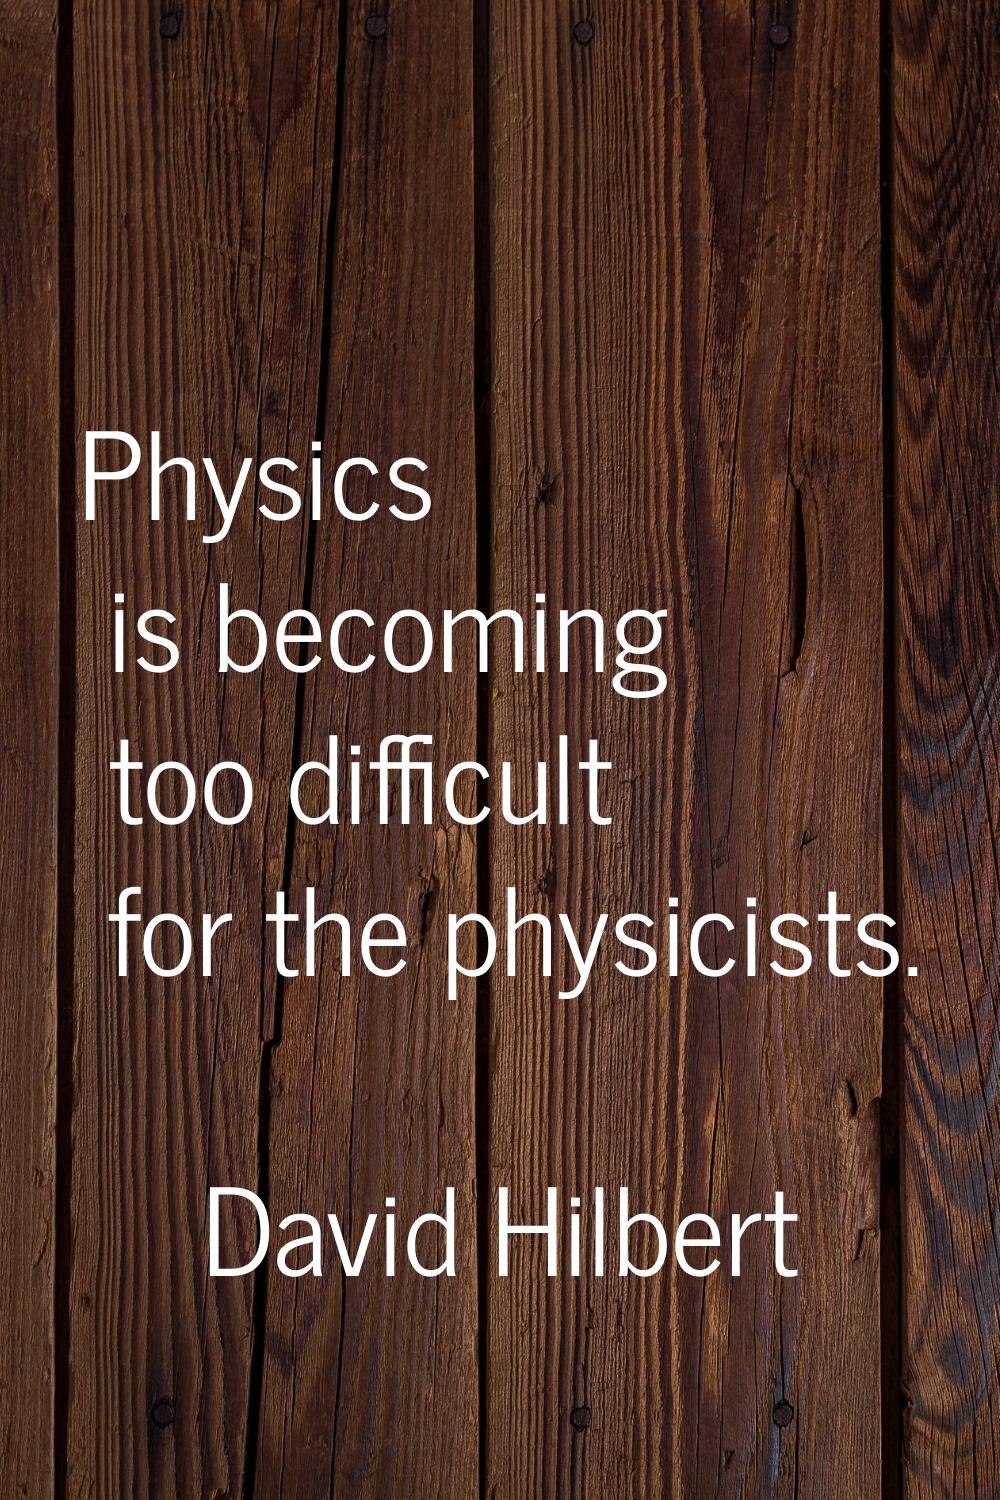 Physics is becoming too difficult for the physicists.